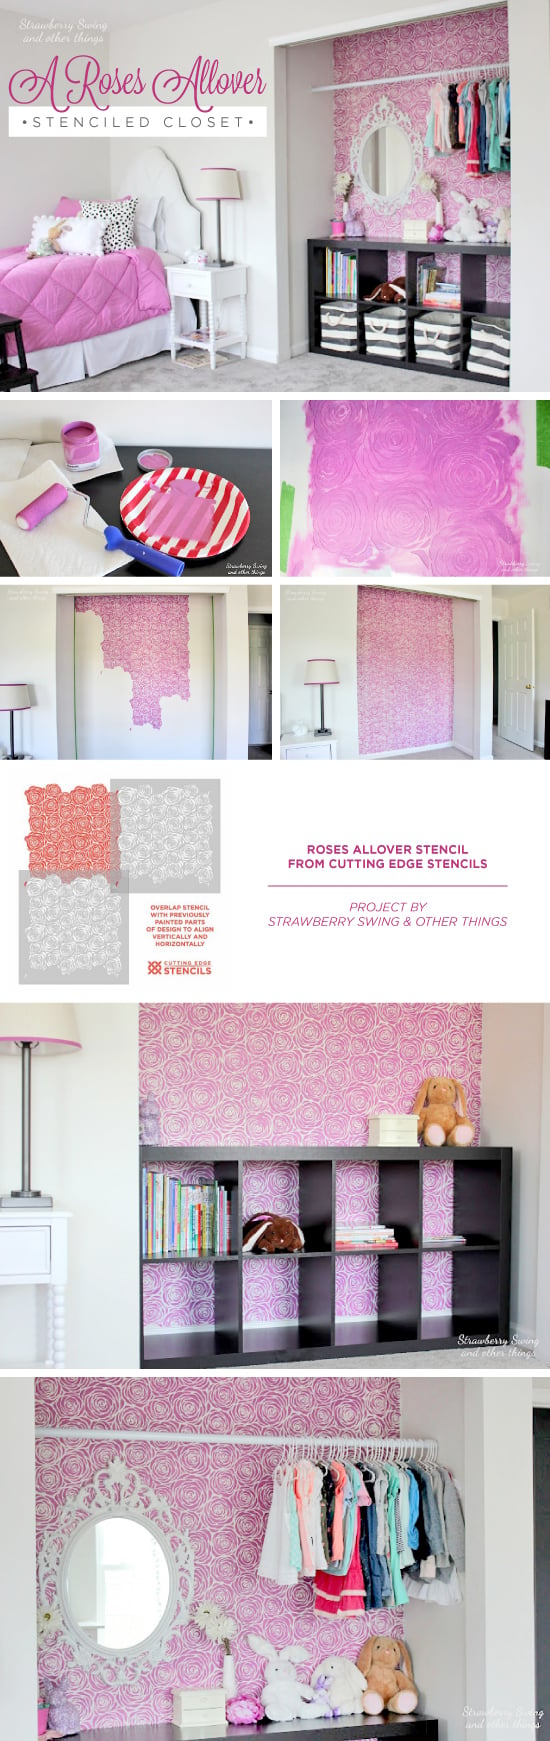 Cutting Edge Stencils shares a DIY stenciled closet idea in a girl's bedroom using the Roses Allover Stencil in Pantone's radiant orchid. http://www.cuttingedgestencils.com/roses-stencil-pattern-rose-design.html